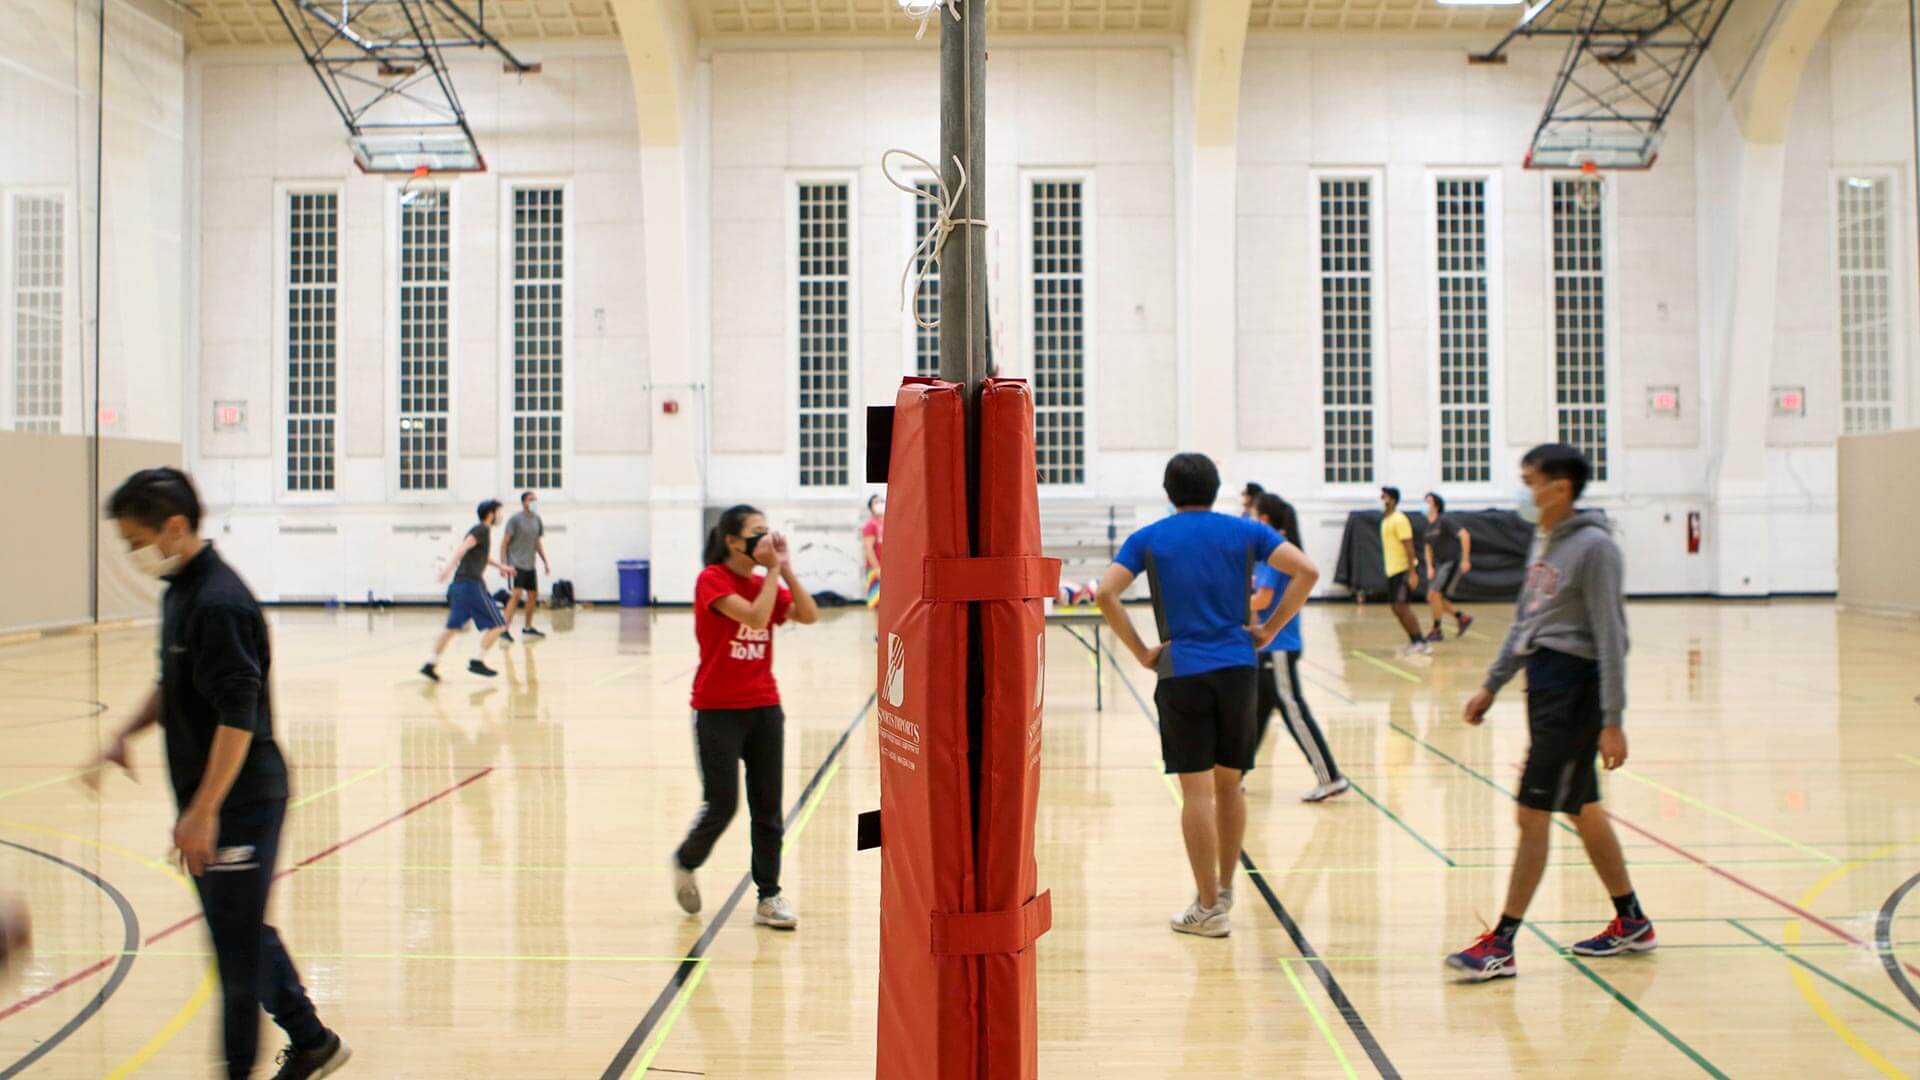 Students wearing masks play intramural volleyball